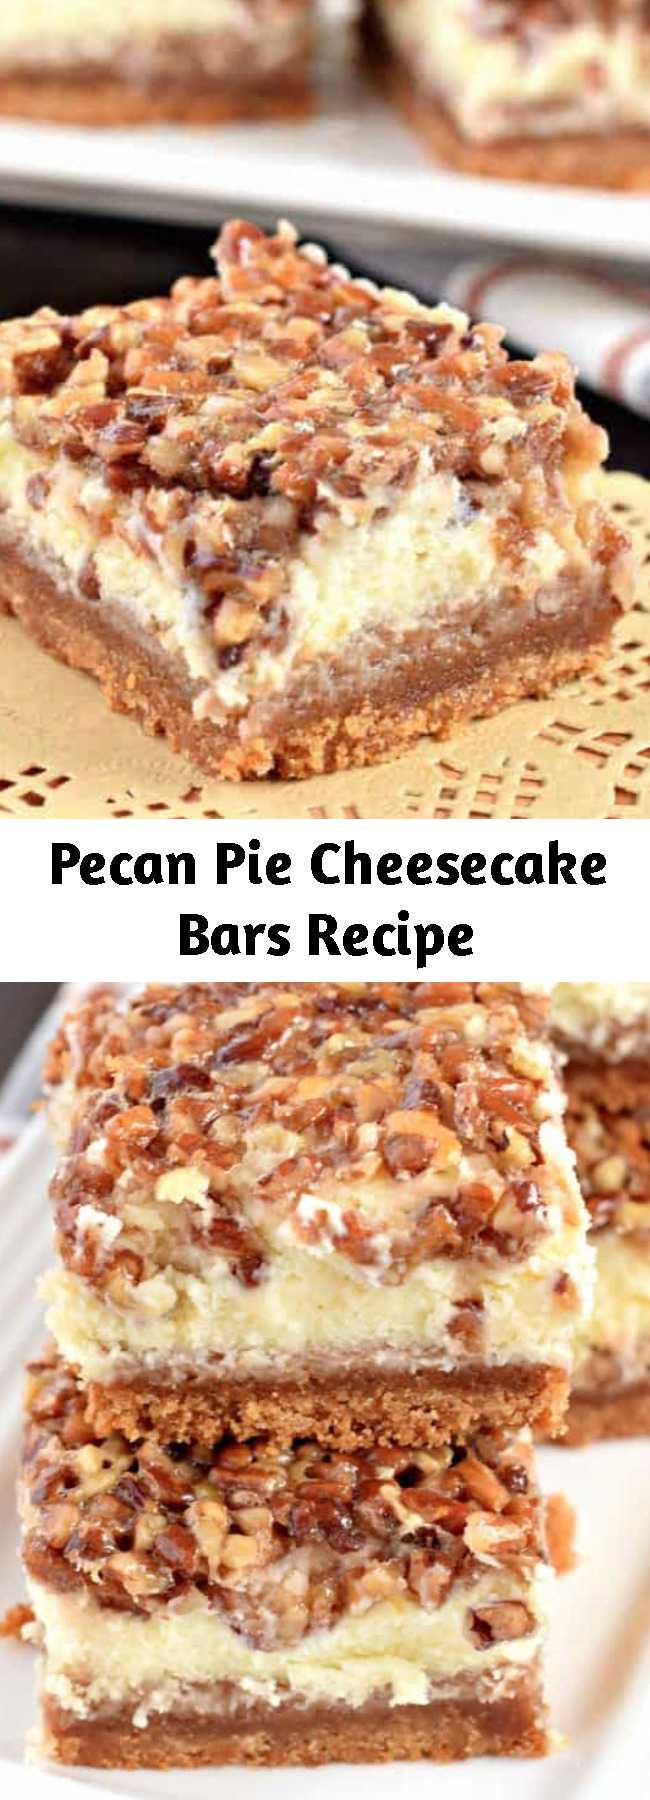 Pecan Pie Cheesecake Bars Recipe - The layers on these Pecan Pie Cheesecake Bars are incredible! One tasty bite and you'll fall in love! From the graham cracker crust, to the sweet cheesecake filling and the pecan pie topping, this holiday dessert receives rave reviews from everyone!